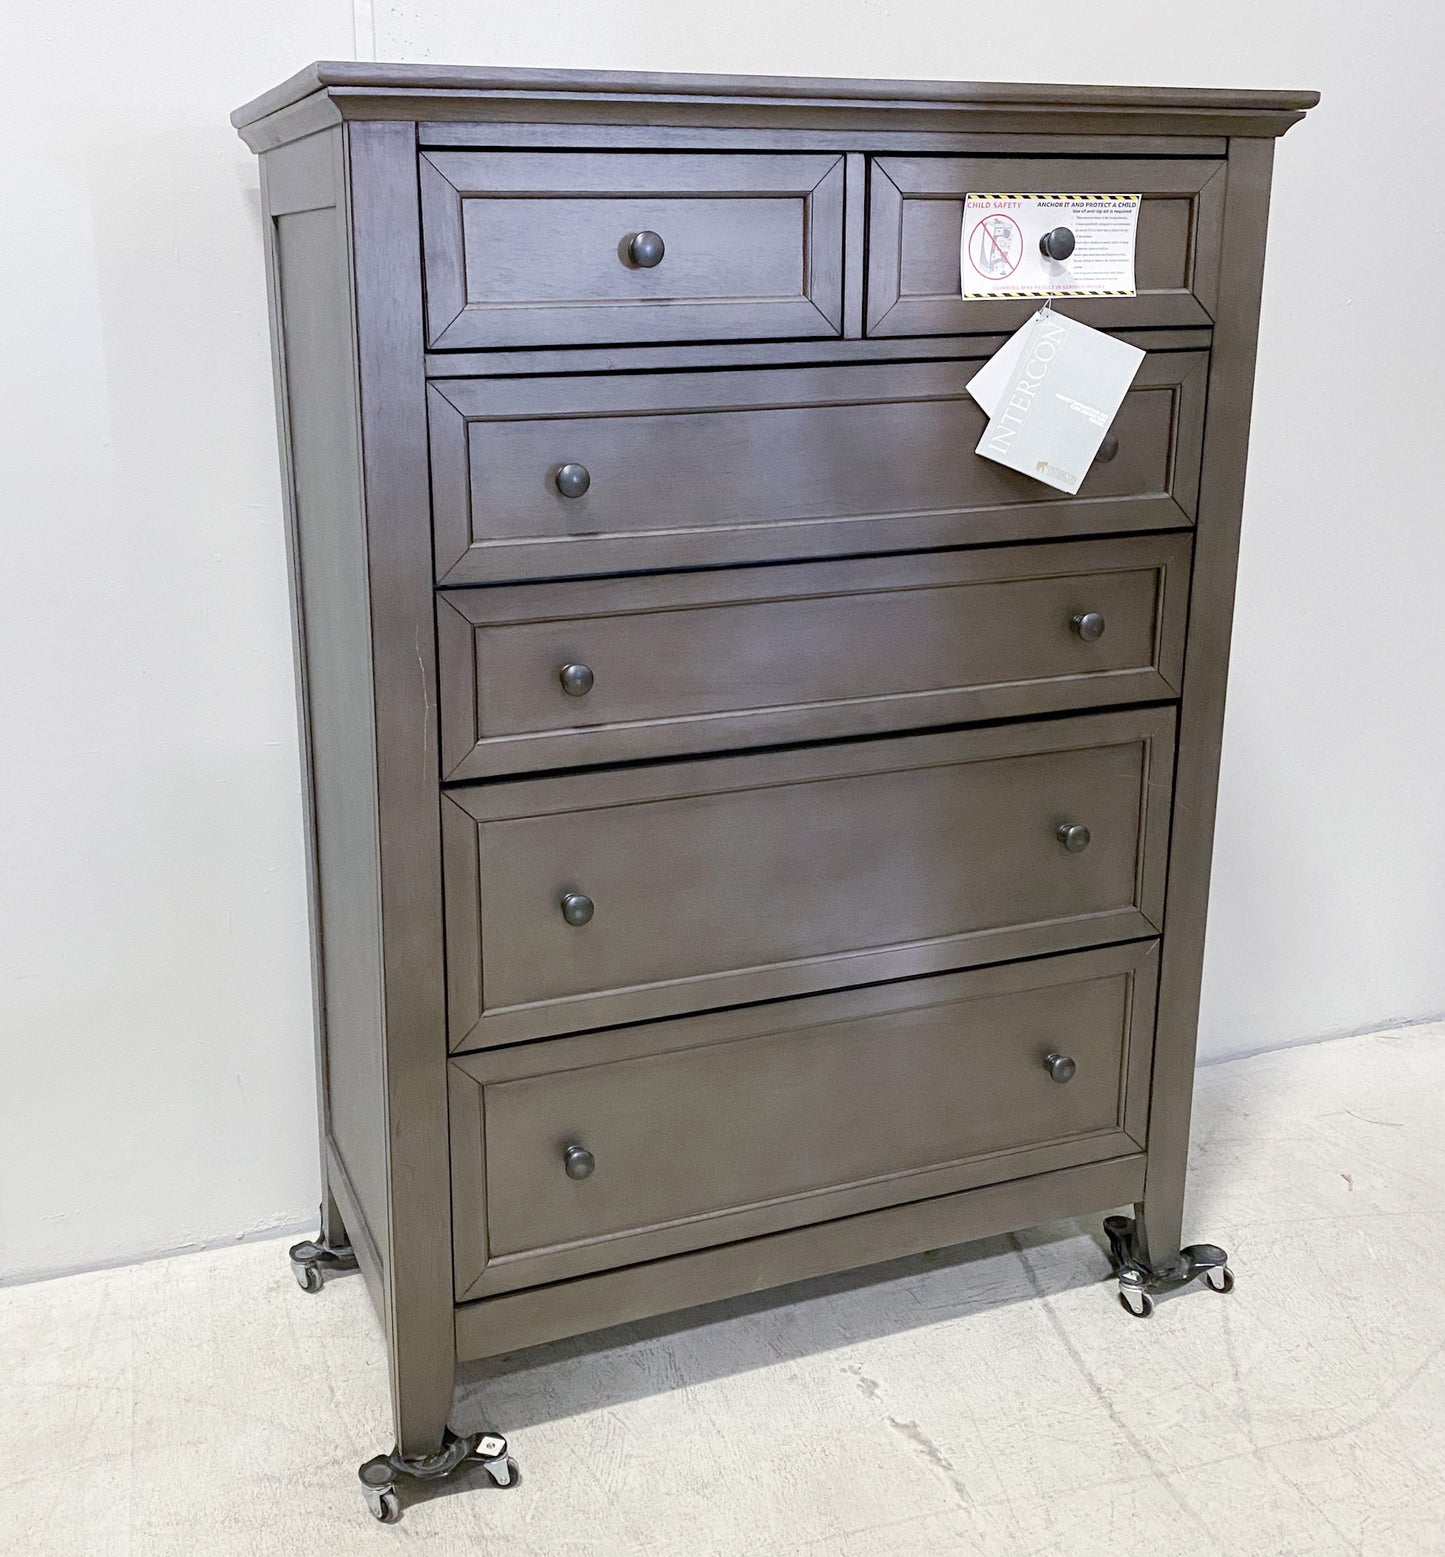 Contemporary San Mateo 6-Drawer Chest Gray